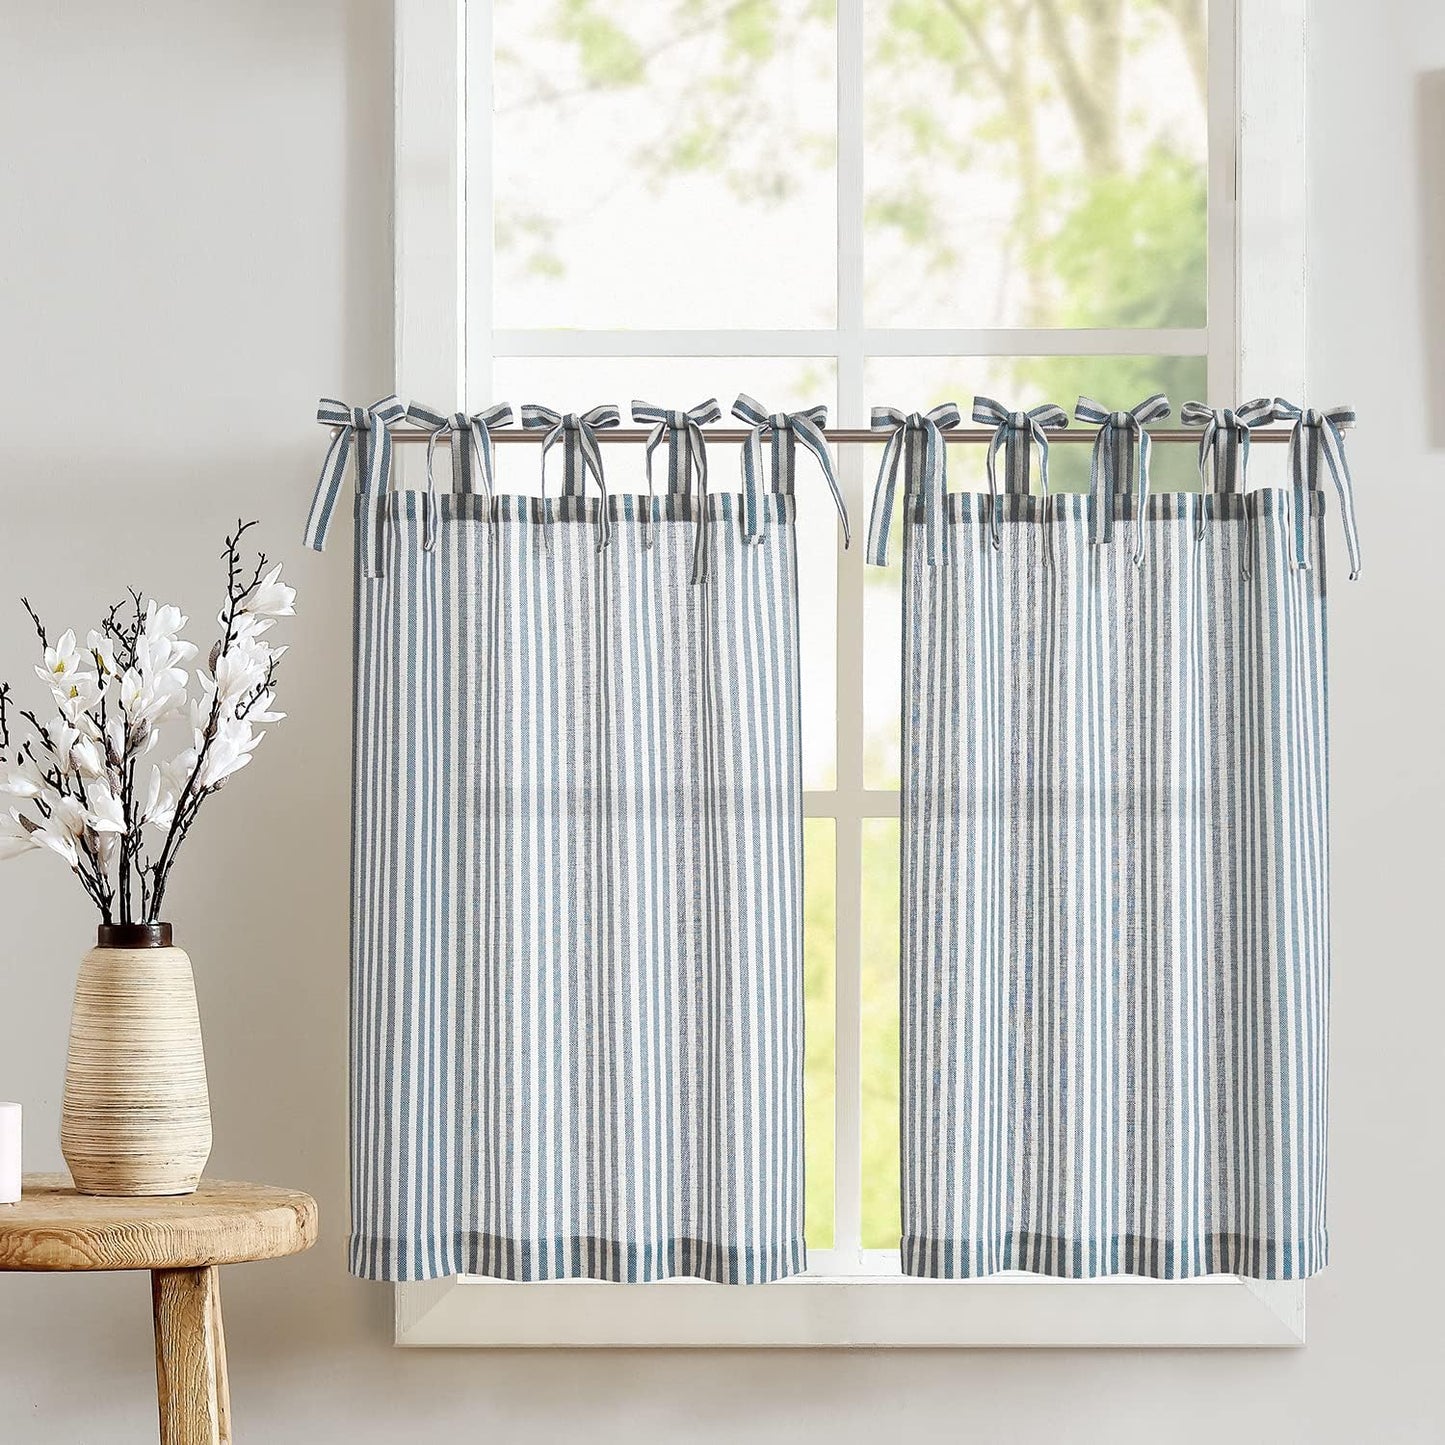 Jinchan Kitchen Curtains Striped Tier Curtains Ticking Stripe Linen Curtains Pinstripe Cafe Curtains 24 Inch Length for Living Room Bathroom Farmhouse Curtains Rod Pocket 2 Panels Black on Beige  CKNY HOME FASHION Tie Top Striped Blue W26 X L24 